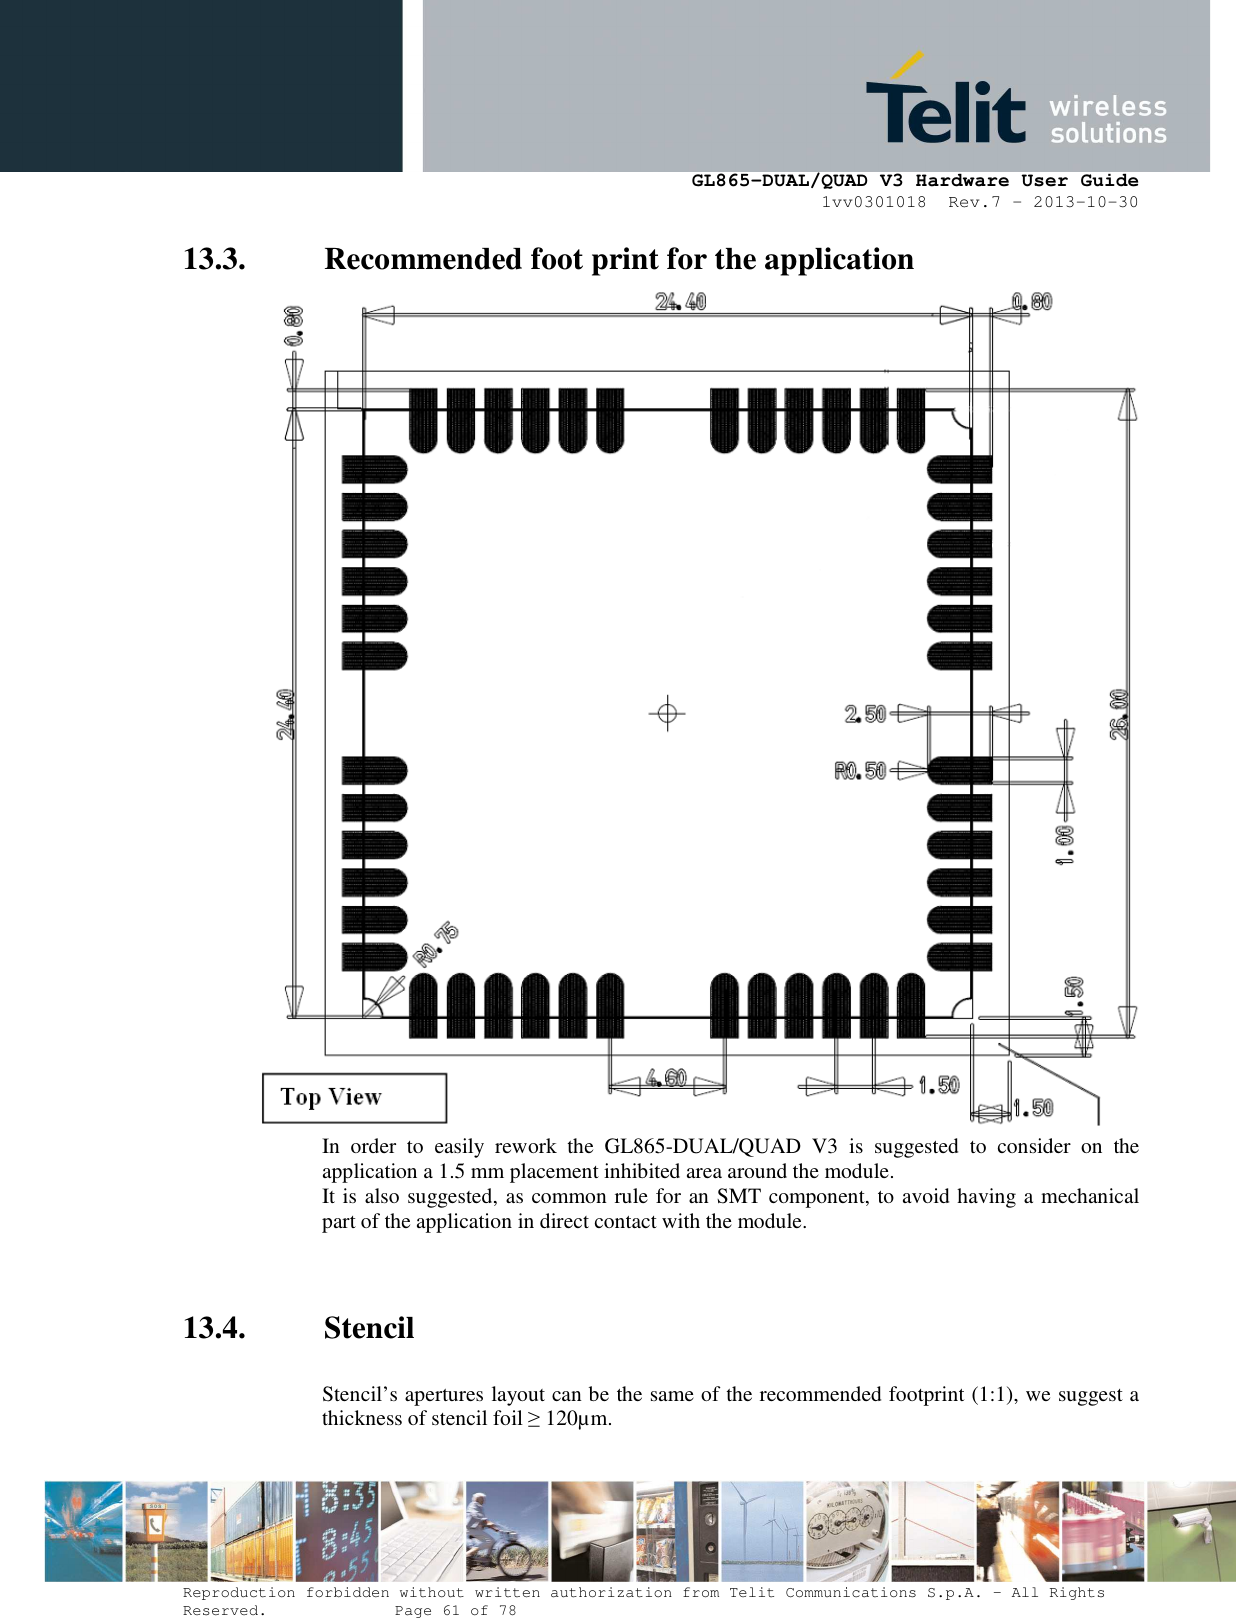      GL865-DUAL/QUAD V3 Hardware User Guide 1vv0301018  Rev.7 – 2013-10-30  Reproduction forbidden without written authorization from Telit Communications S.p.A. - All Rights Reserved.    Page 61 of 78 Mod. 0805 2011-07 Rev.2 13.3. Recommended foot print for the application  In  order  to  easily  rework  the  GL865-DUAL/QUAD  V3  is  suggested  to  consider  on  the application a 1.5 mm placement inhibited area around the module. It is also suggested, as common rule for an SMT component, to avoid having a mechanical part of the application in direct contact with the module.   13.4. Stencil  Stencil’s apertures layout can be the same of the recommended footprint (1:1), we suggest a thickness of stencil foil ≥ 120µm.   